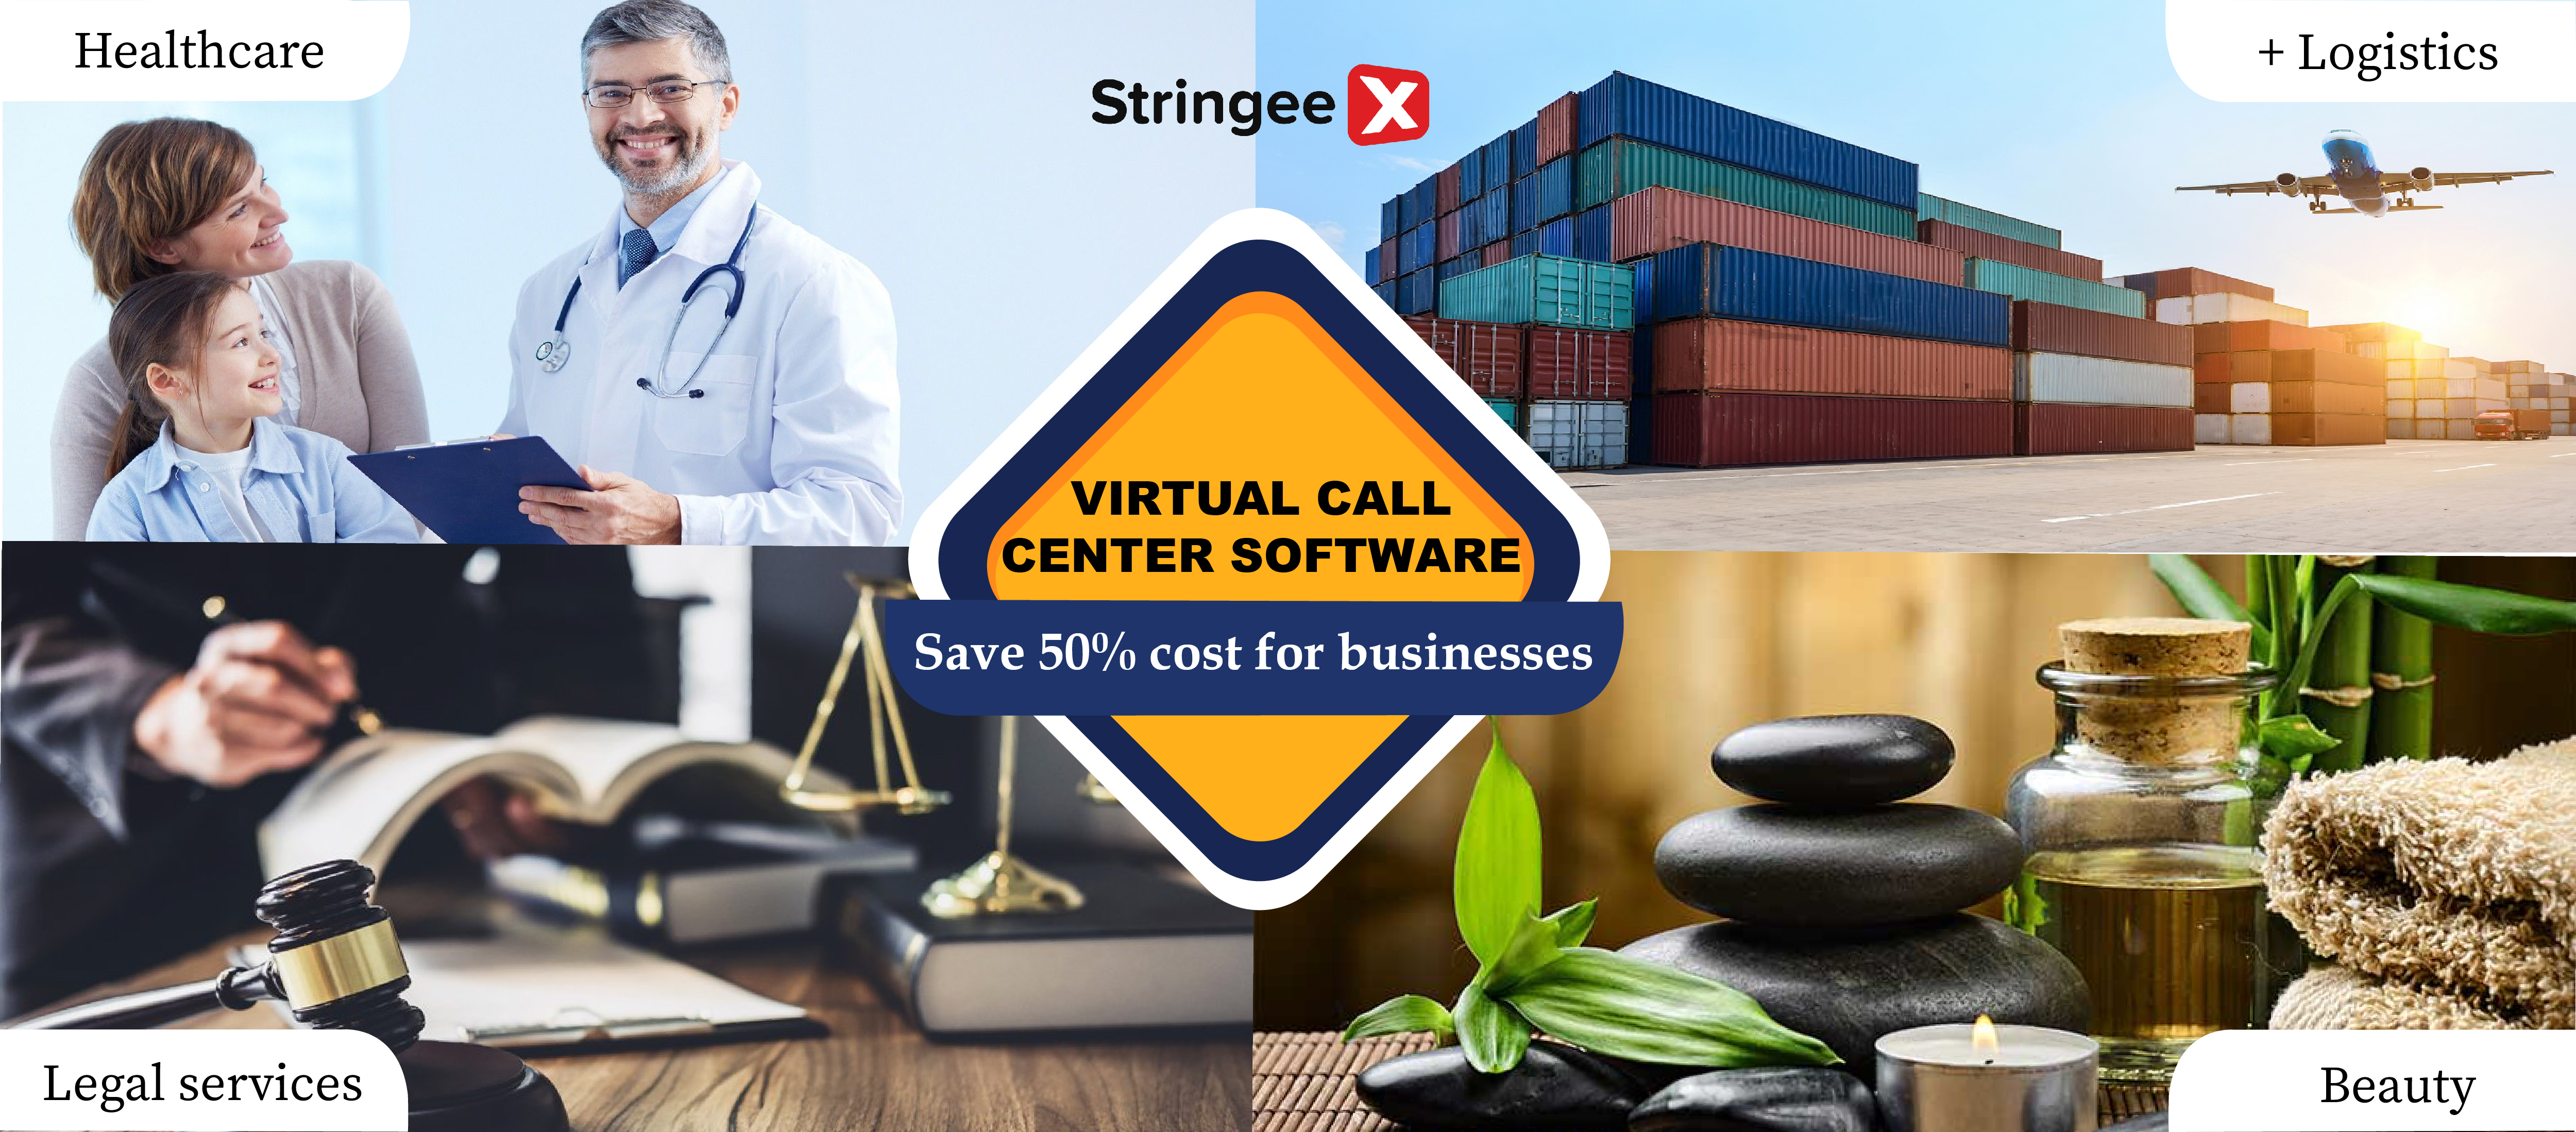 A few business models that successfully applied a virtual call center